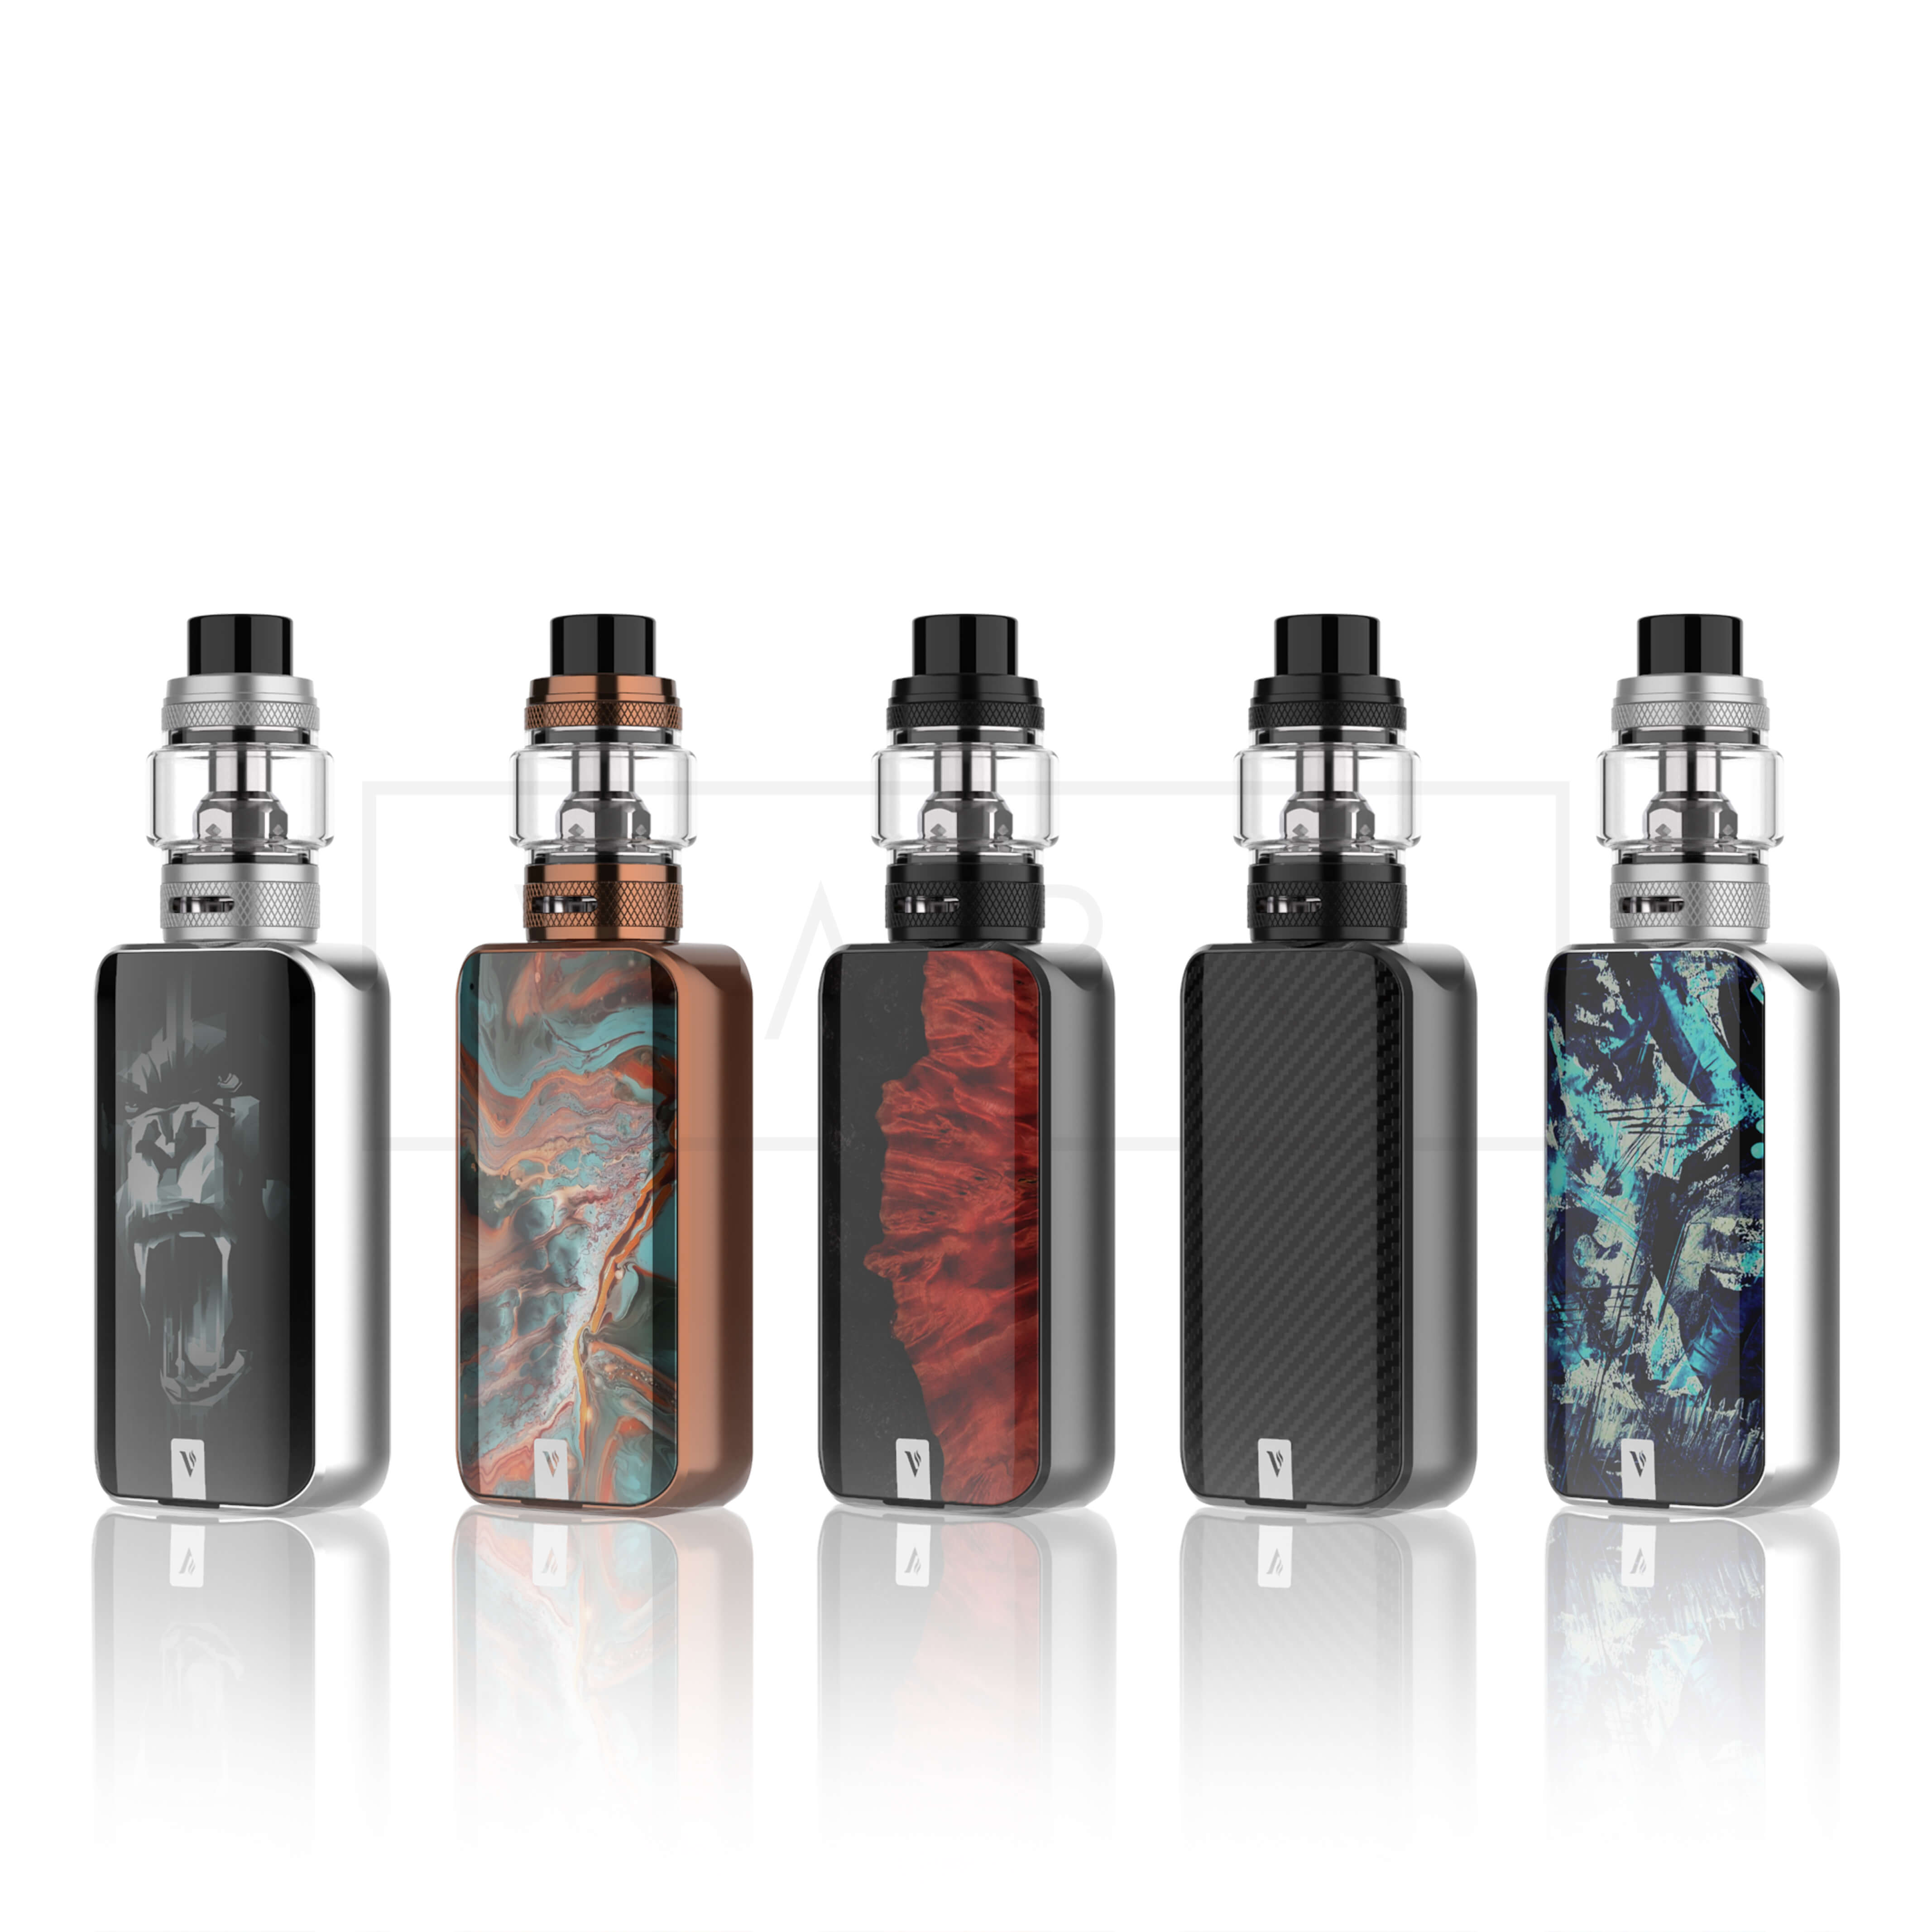 Vaporesso Luxe II 2 220W Kit Sub Ohm Starter Tank Mod In All Colours